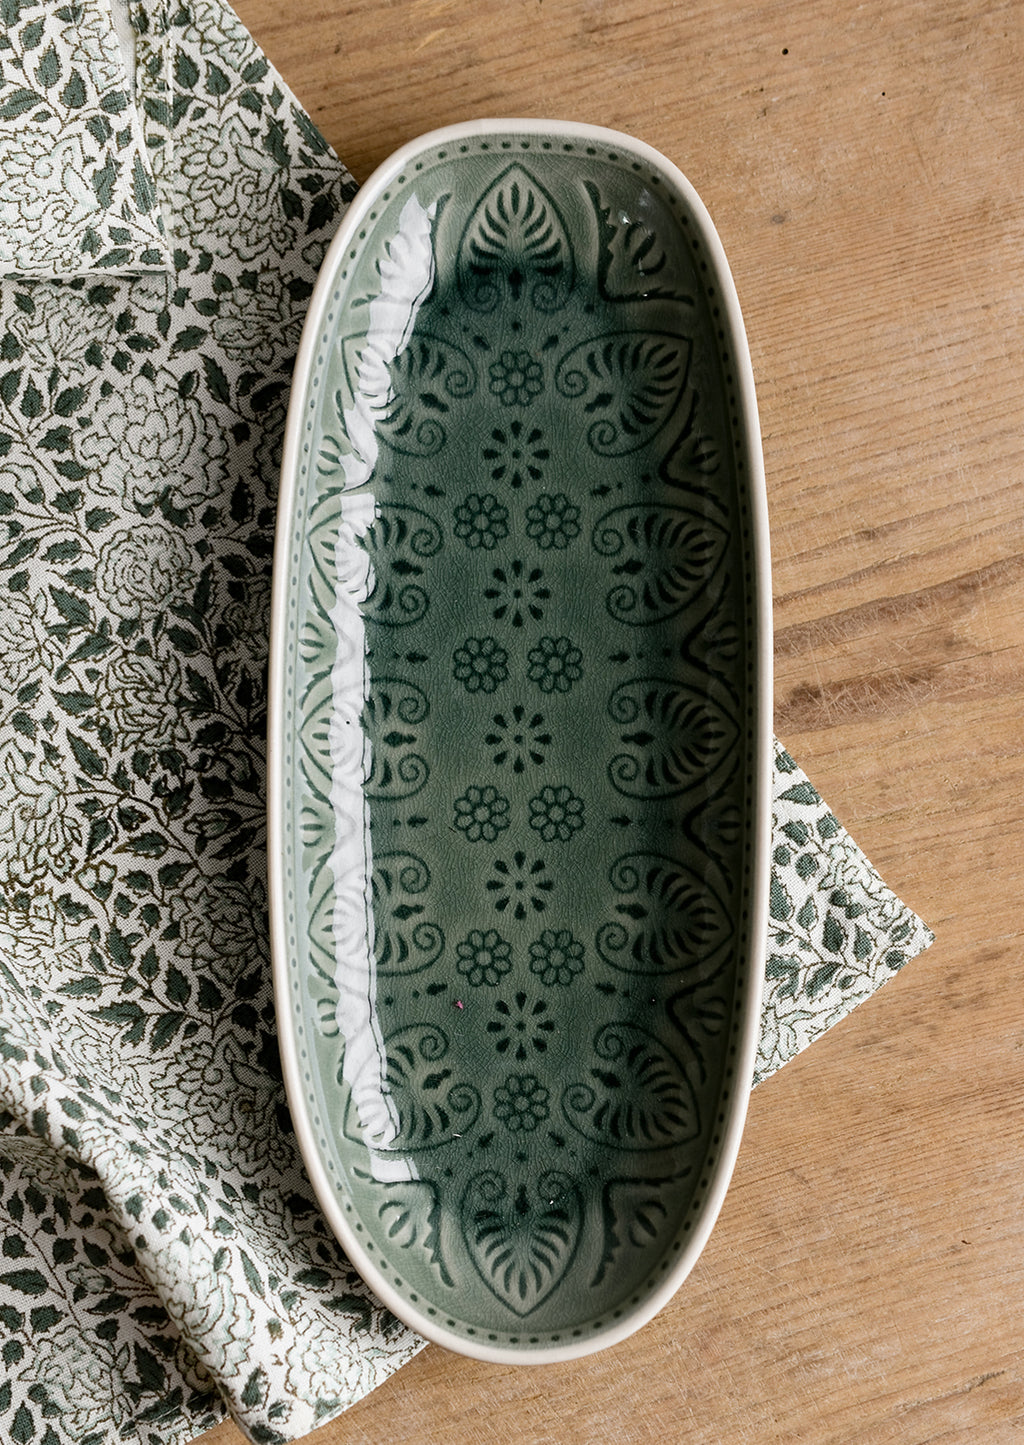 1: An oblong, curved platter in glossy green glaze with Polish inspired pattern.